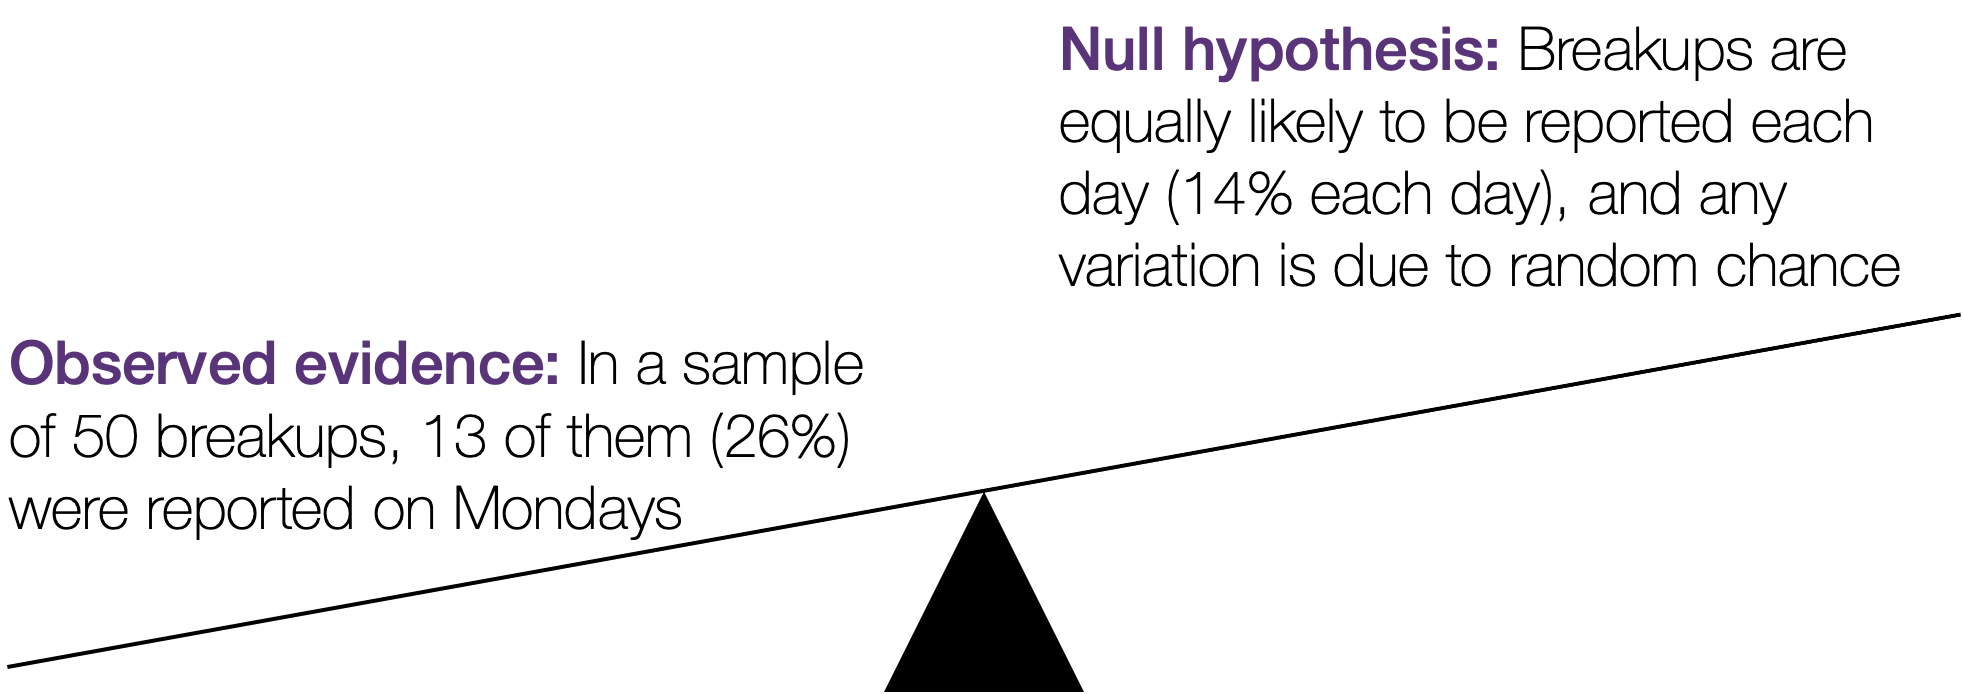 The observed results is not compatible with the null model. This provides strong evidence against the null hypothesis and suggests that breakups are more likley to be reported on Mondays